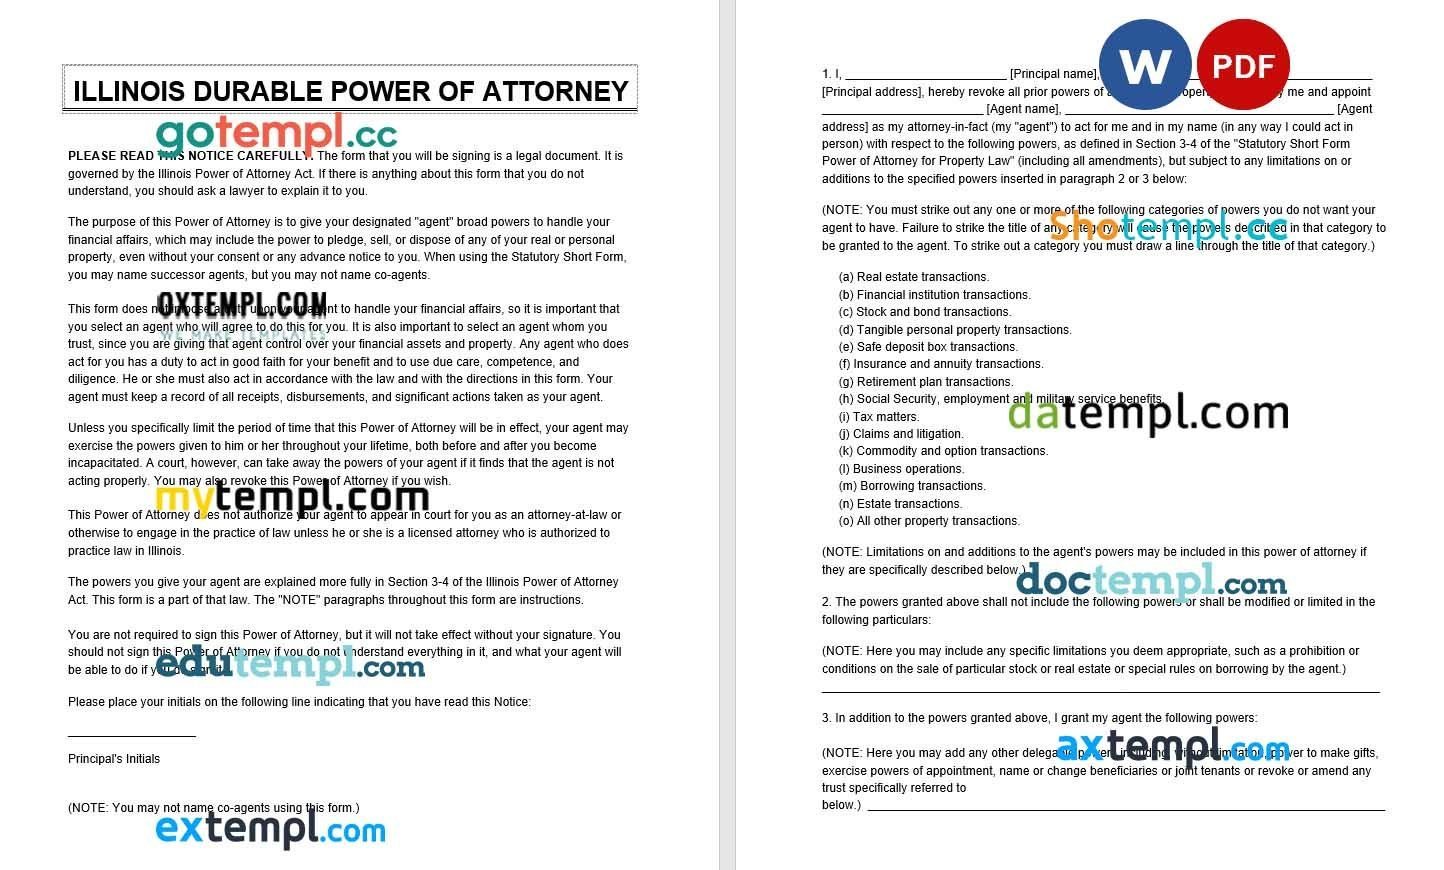 Illinois Power of Attorney Financial example, fully editable